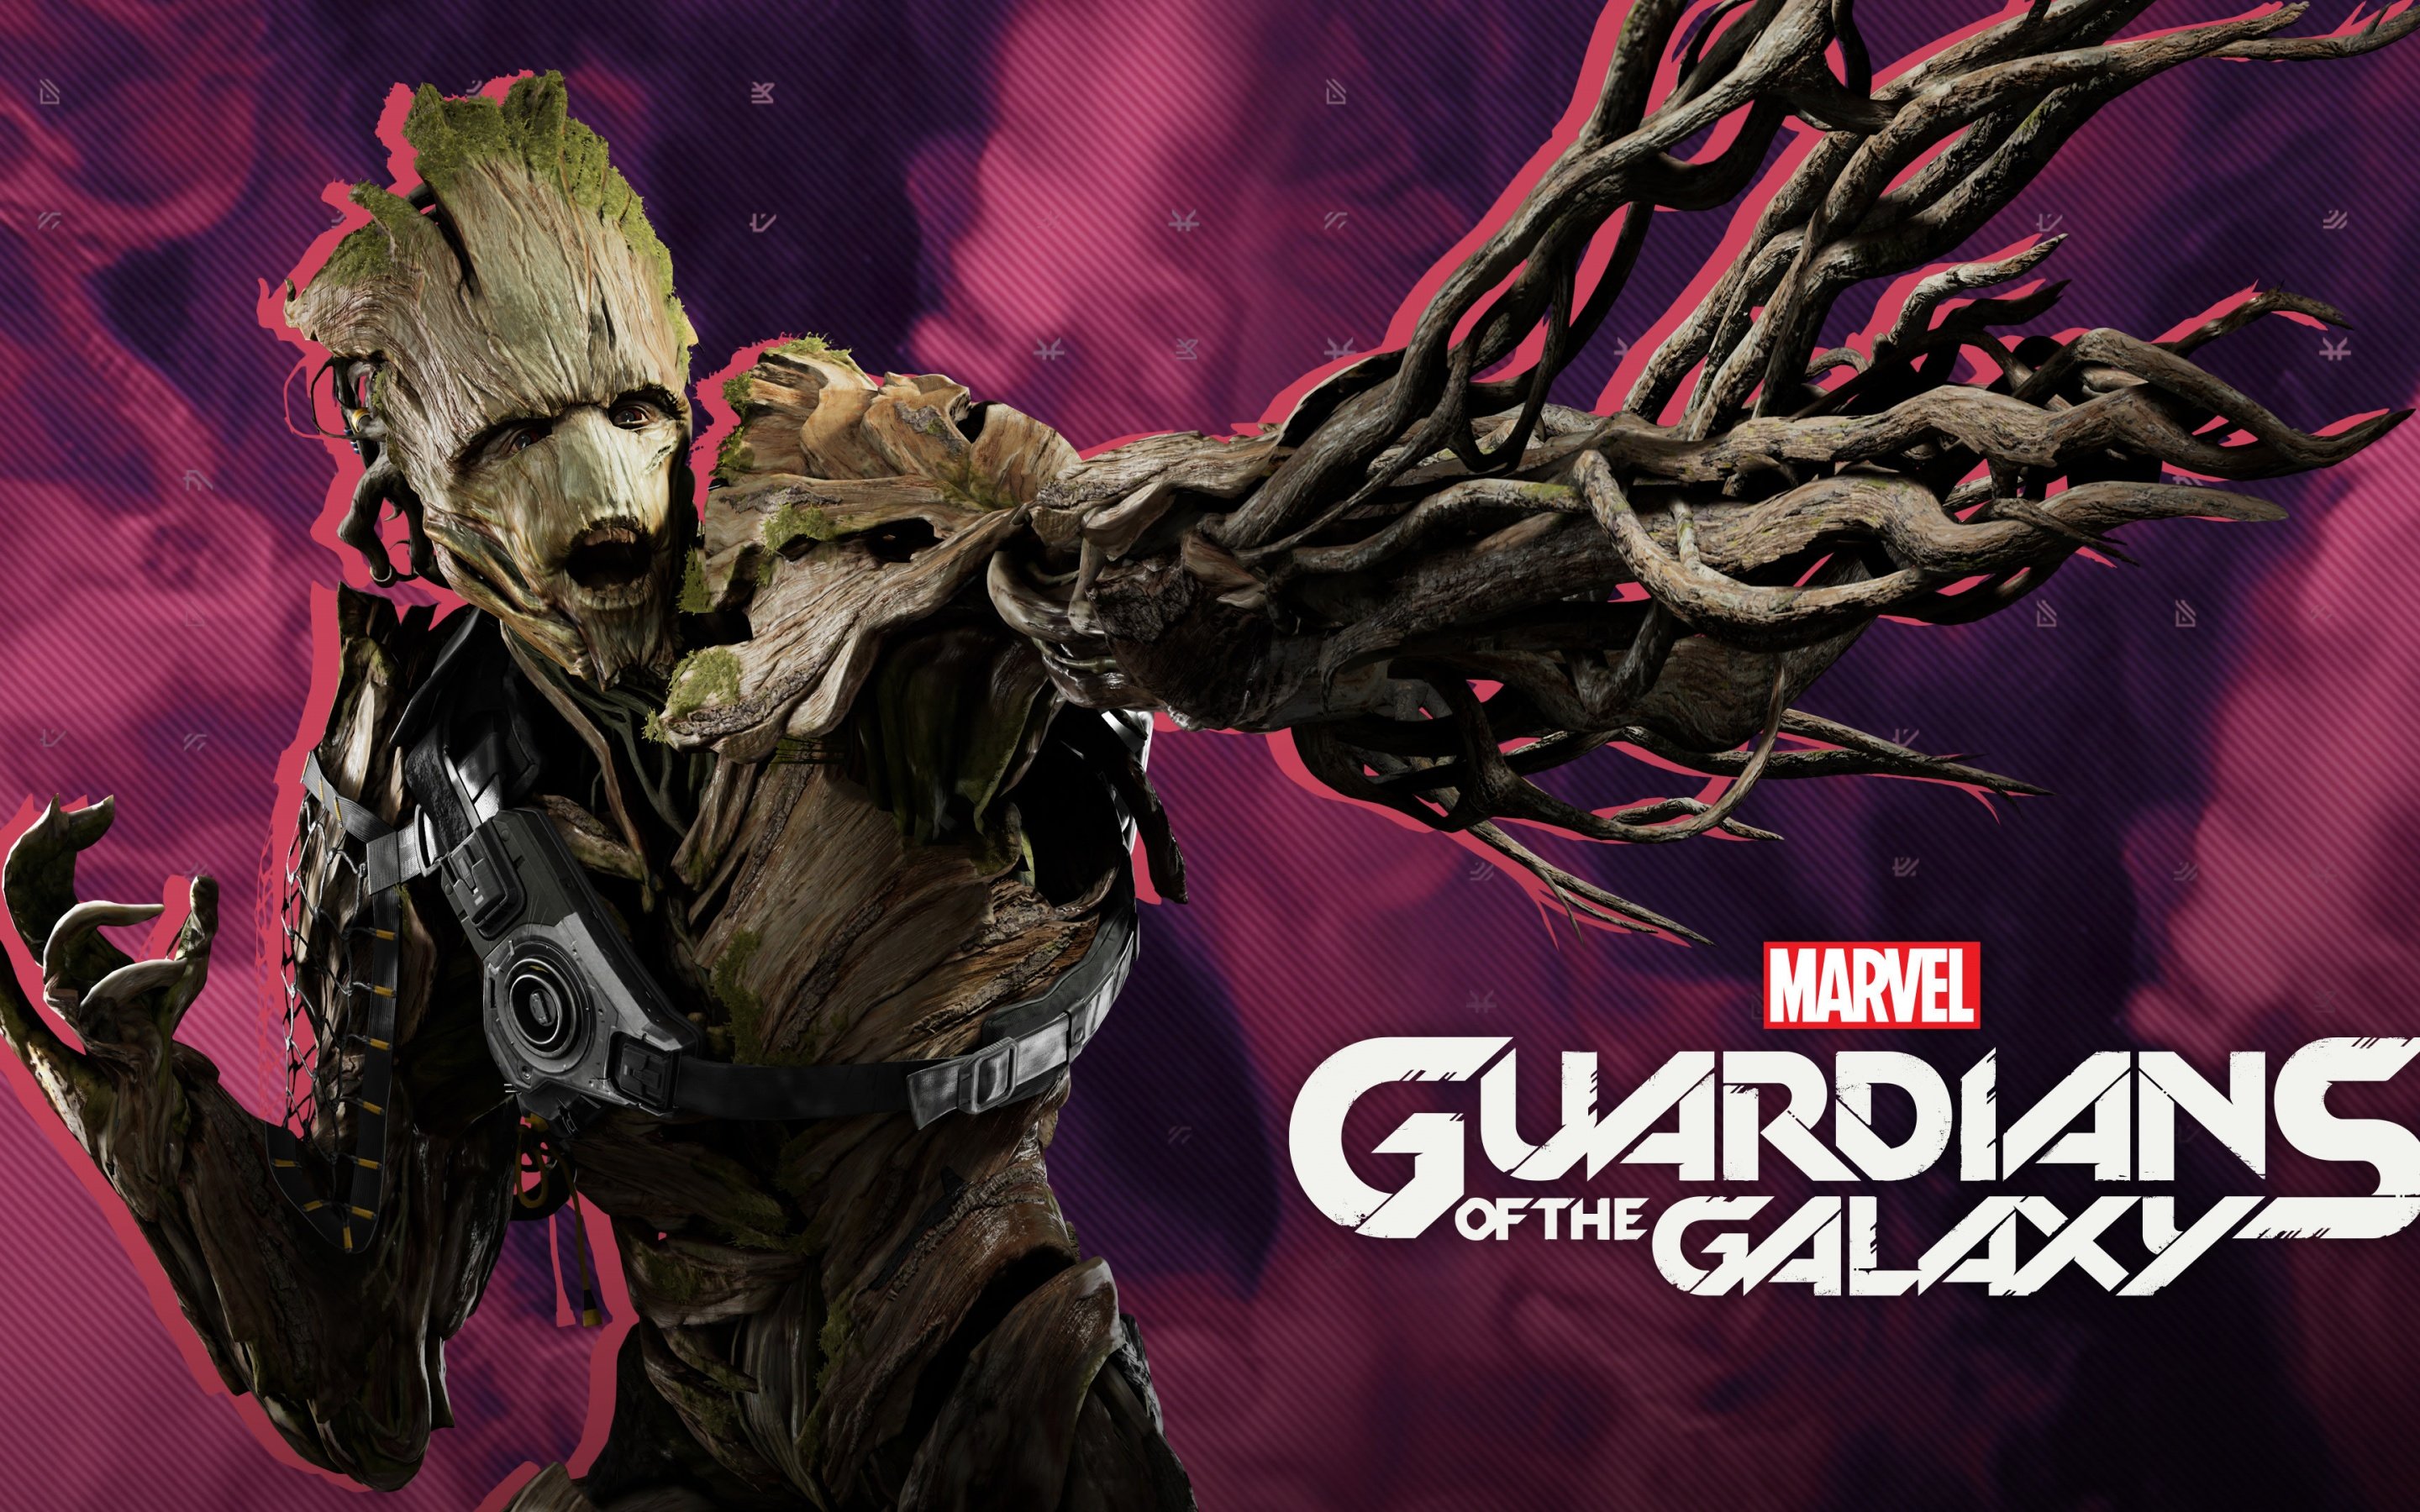 Marvel's Guardians of the Galaxy Wallpaper 4K, Groot, 2021 Games, Games